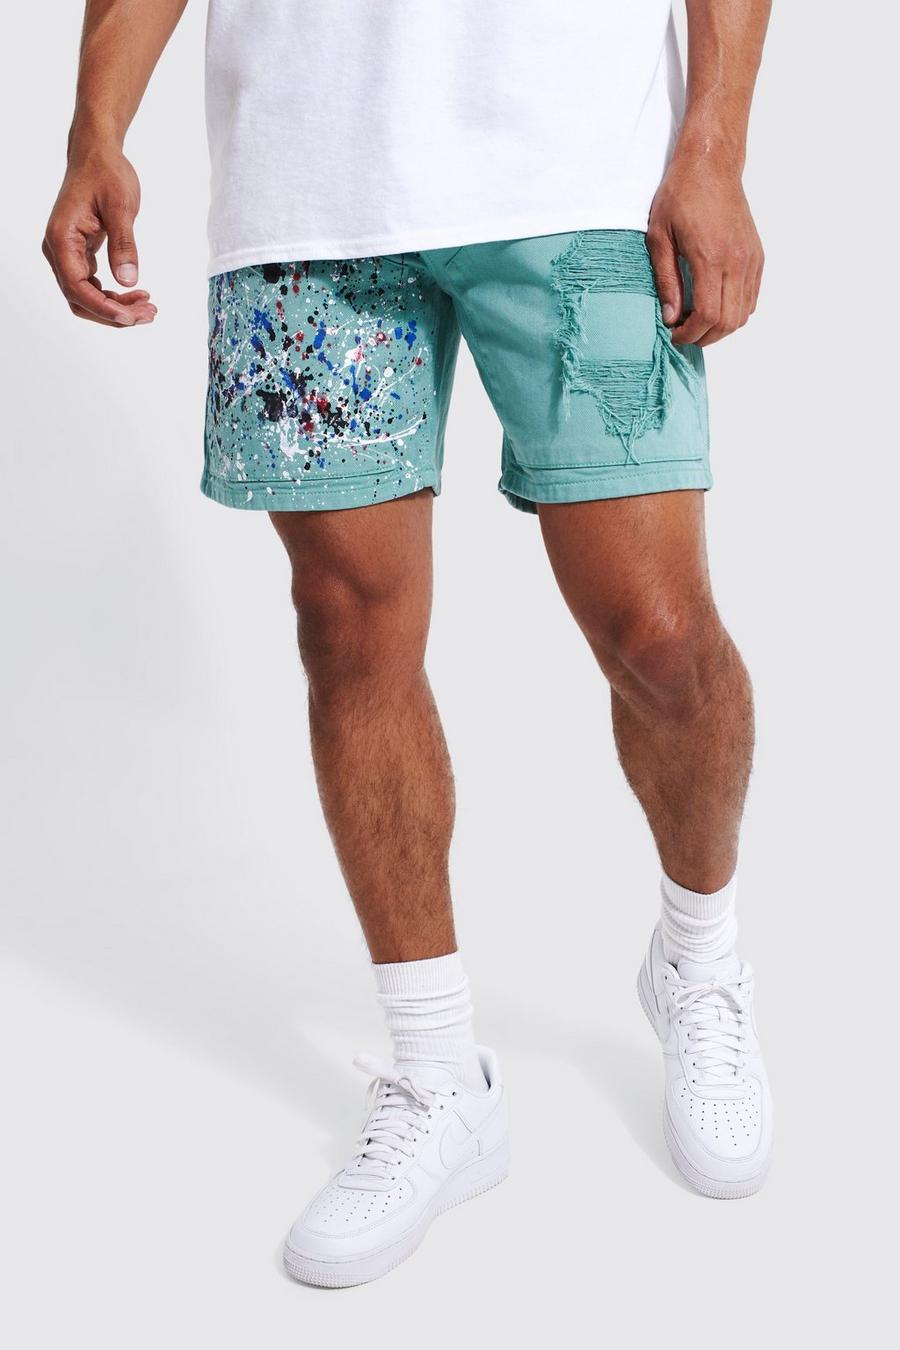 https://media.boohoo.com/i/boohoo/bmm48689_sage_xl/male-sage-fixed-relaxed-busted-thigh-layer-short/?w=900&qlt=default&fmt.jp2.qlt=70&fmt=auto&sm=fit